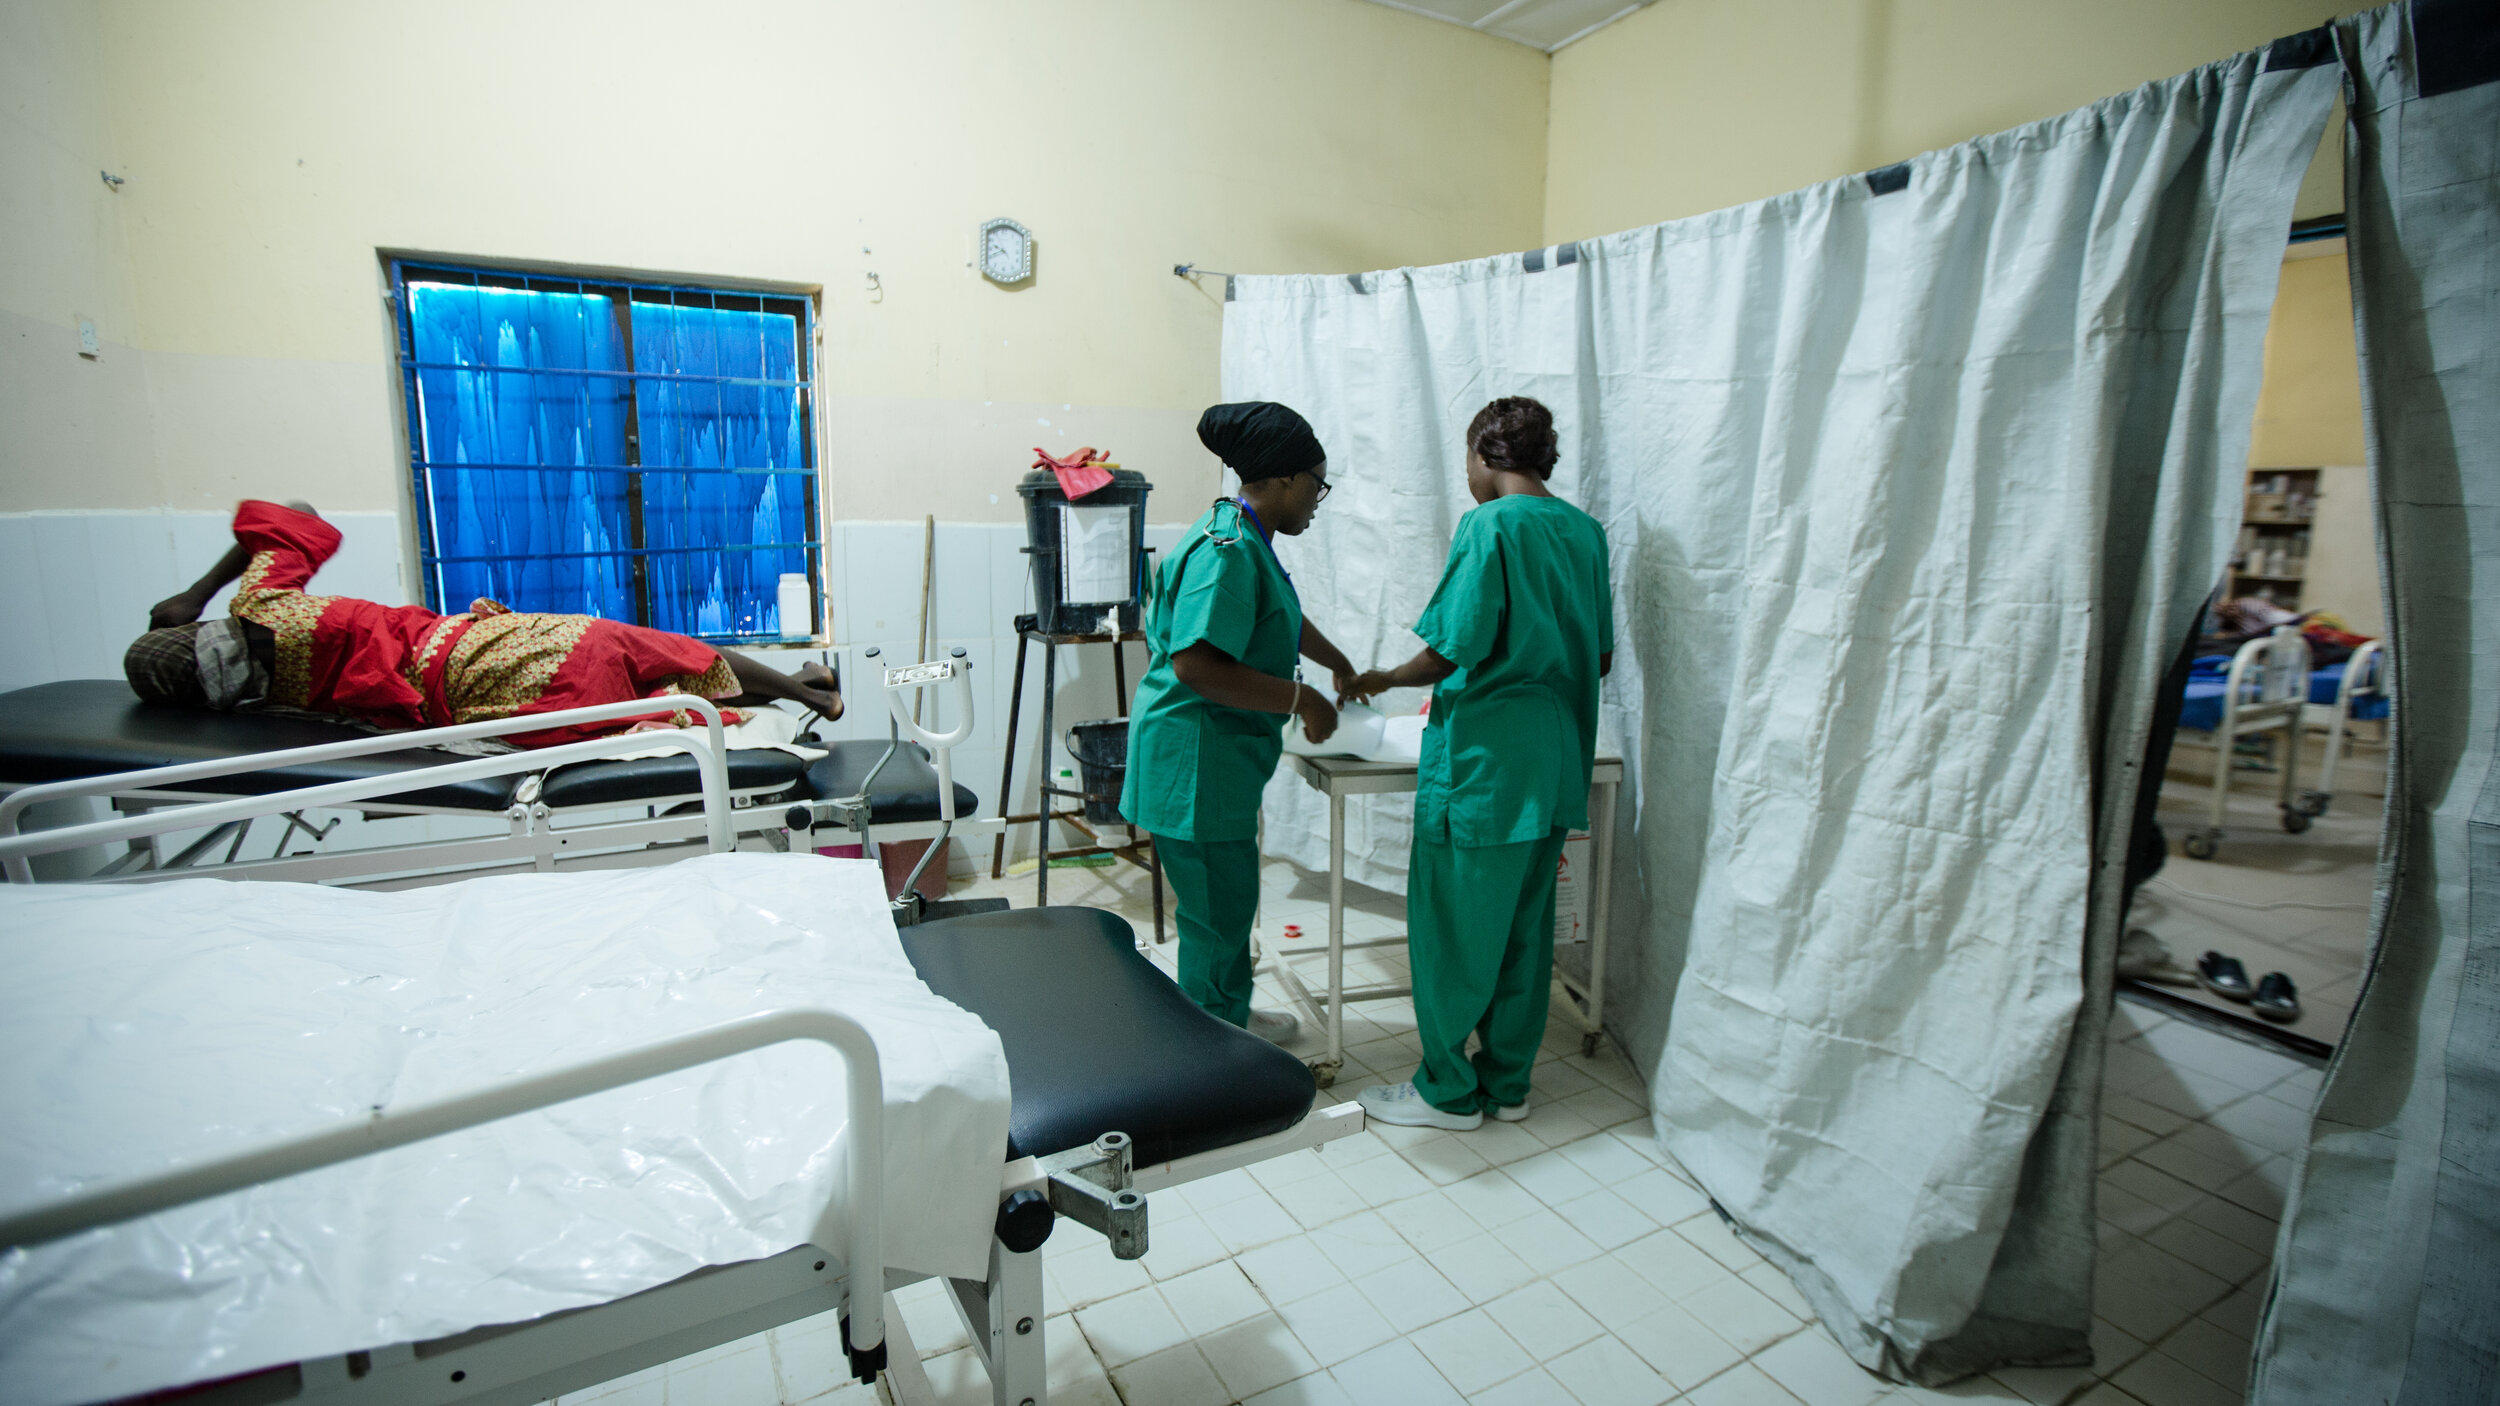  November 2018, Monguno, Nigeria. At 10am, 18 years old Hussana Adamou arrived in labor to the only maternal health clinic in the area. Dr. May Murithi, the cofounder of this ALIMA free clinic, was in charge of the delivery.    